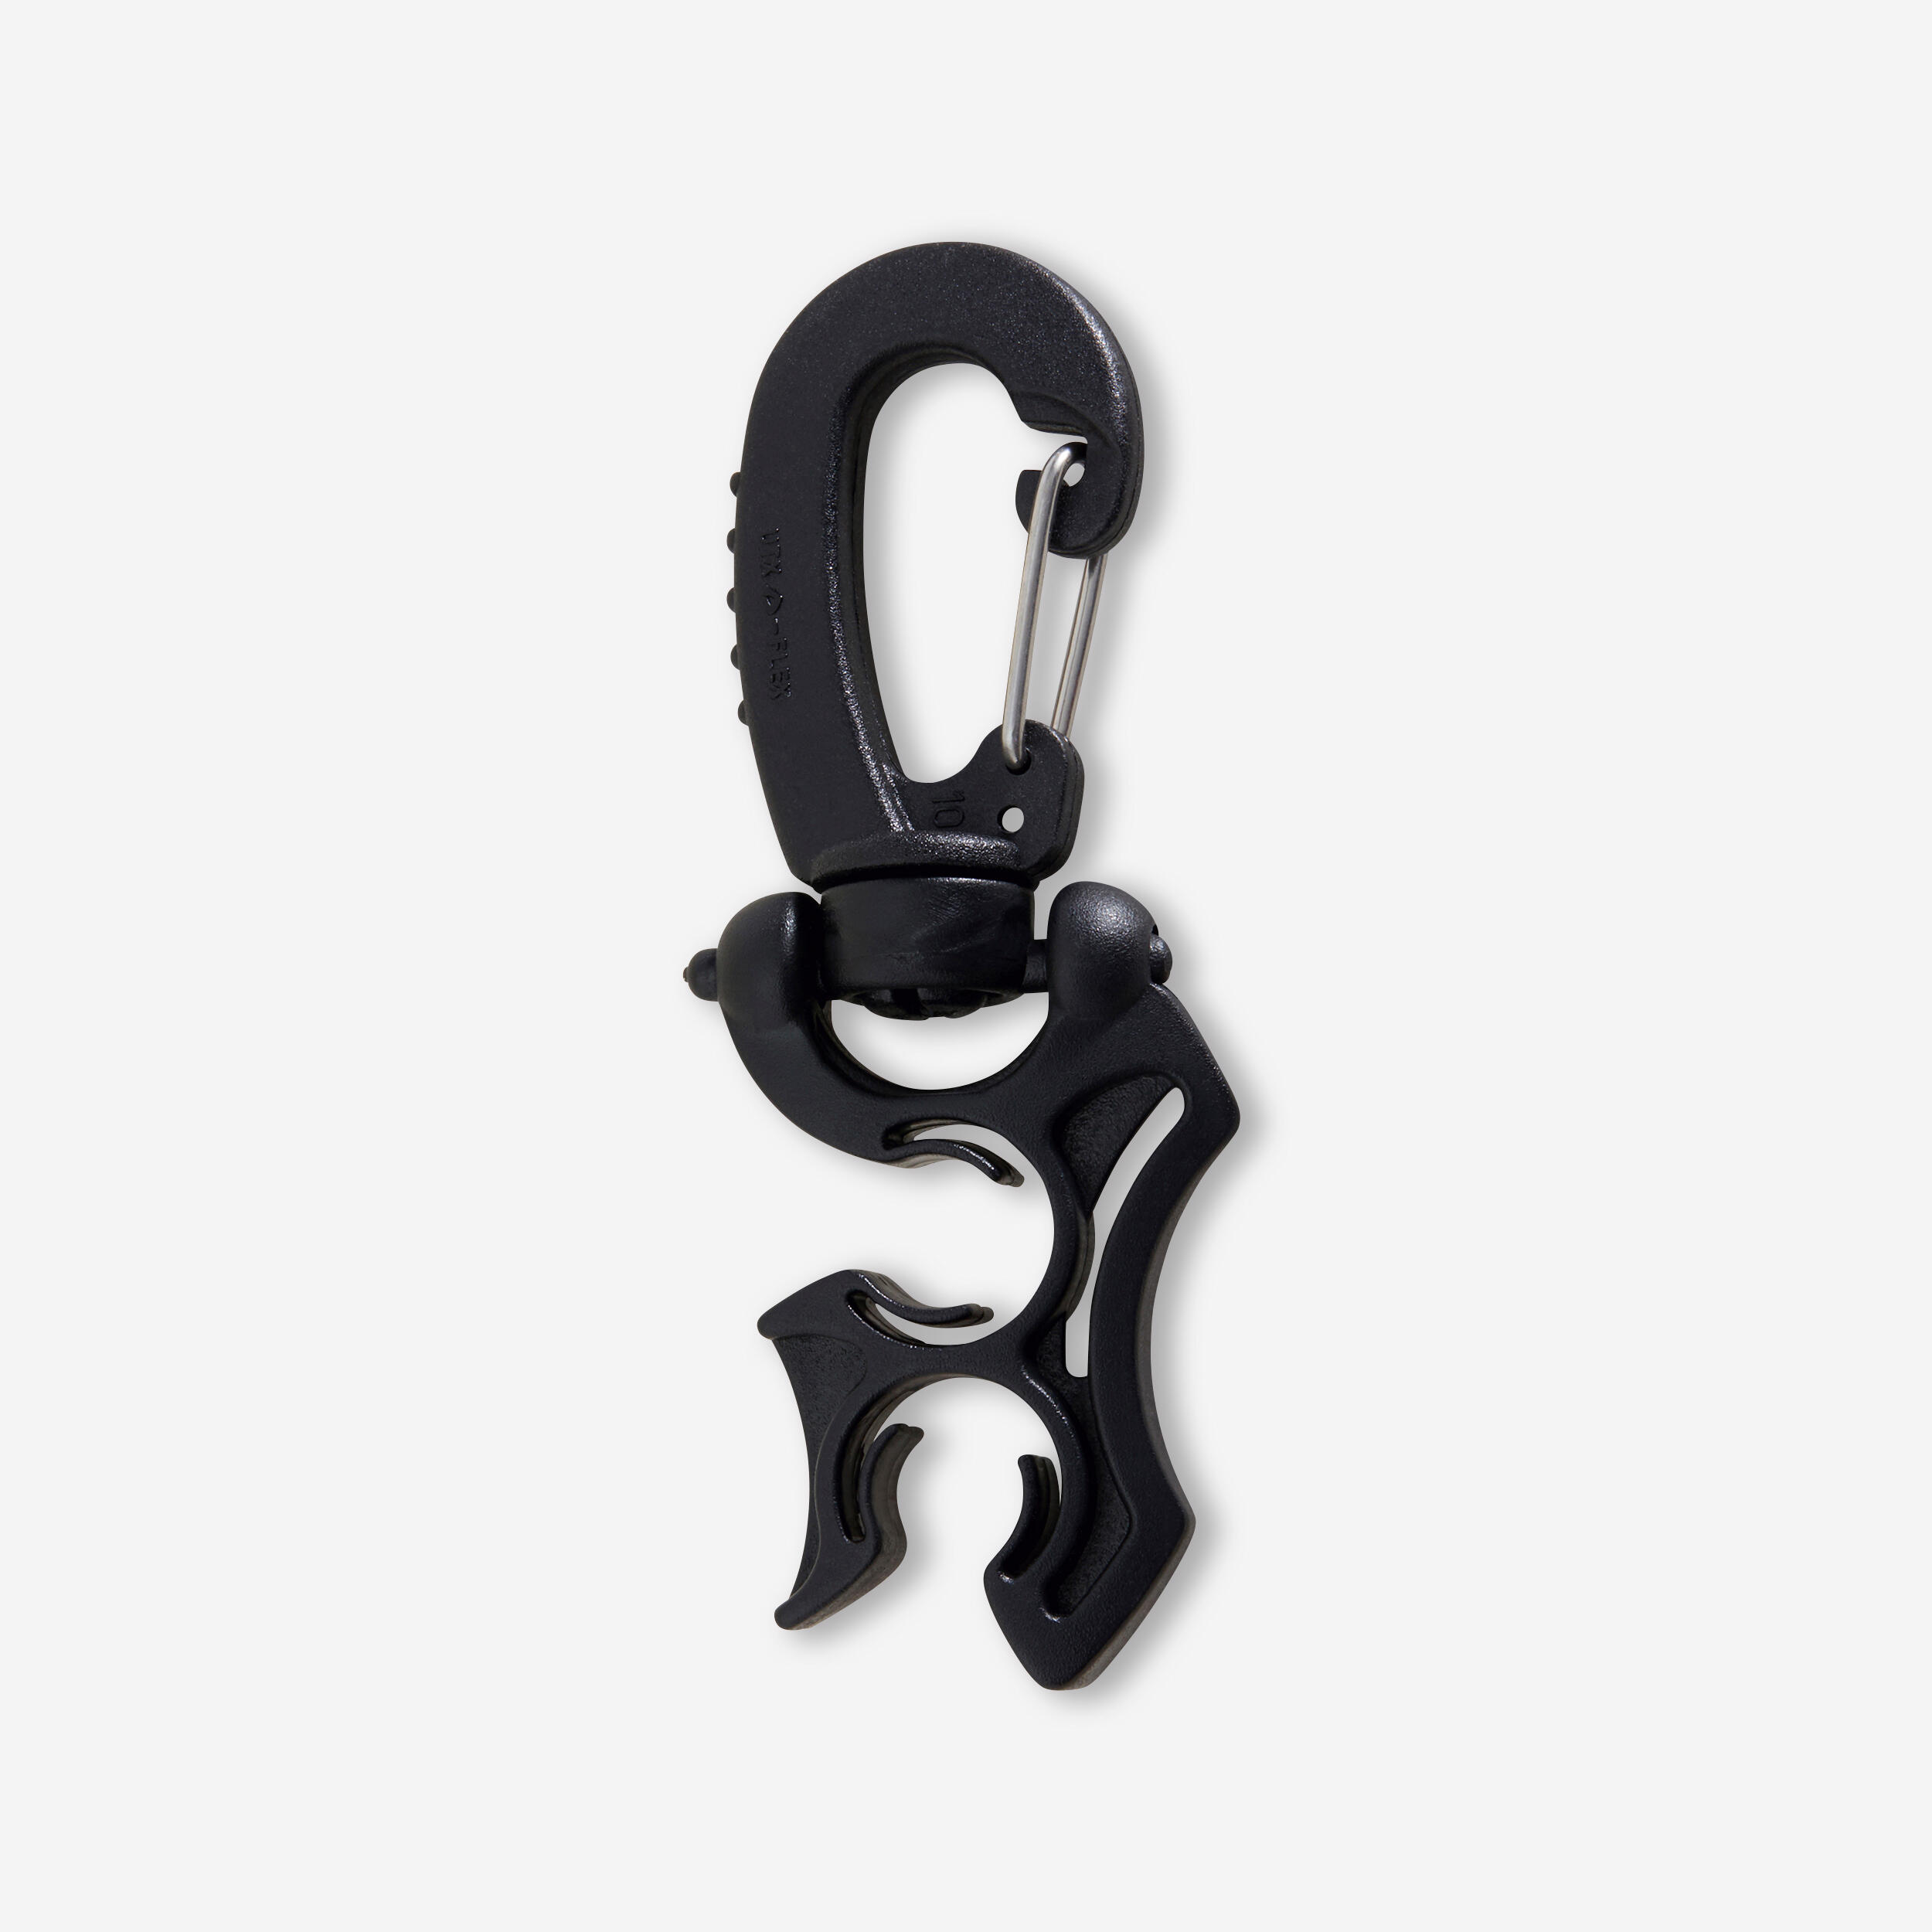 Diving Reef Hooks and Carabiners